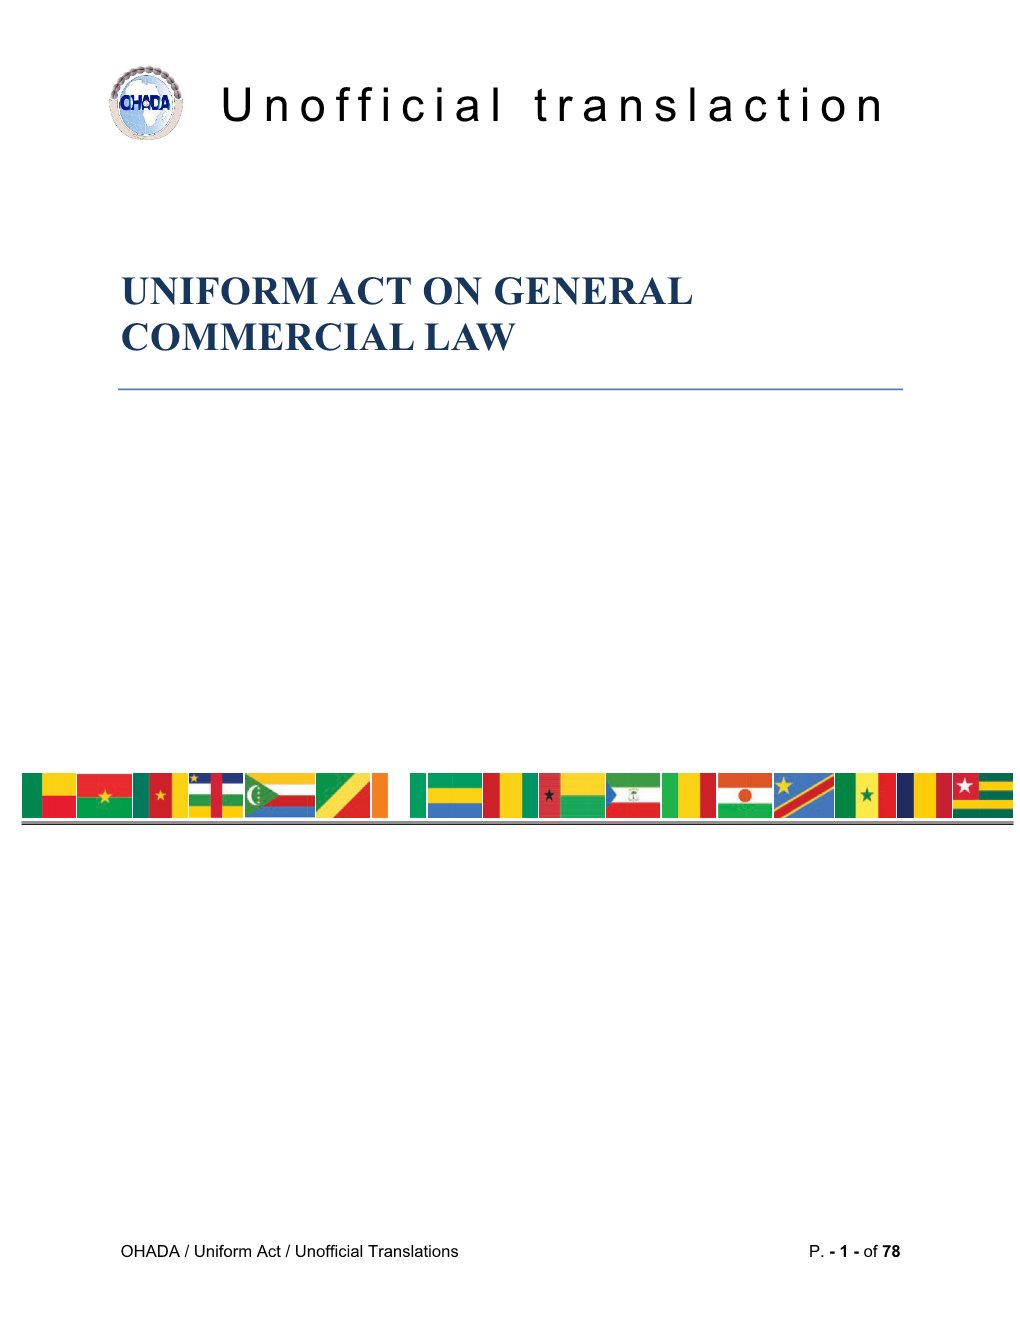 Uniform Act on General Commercial Law